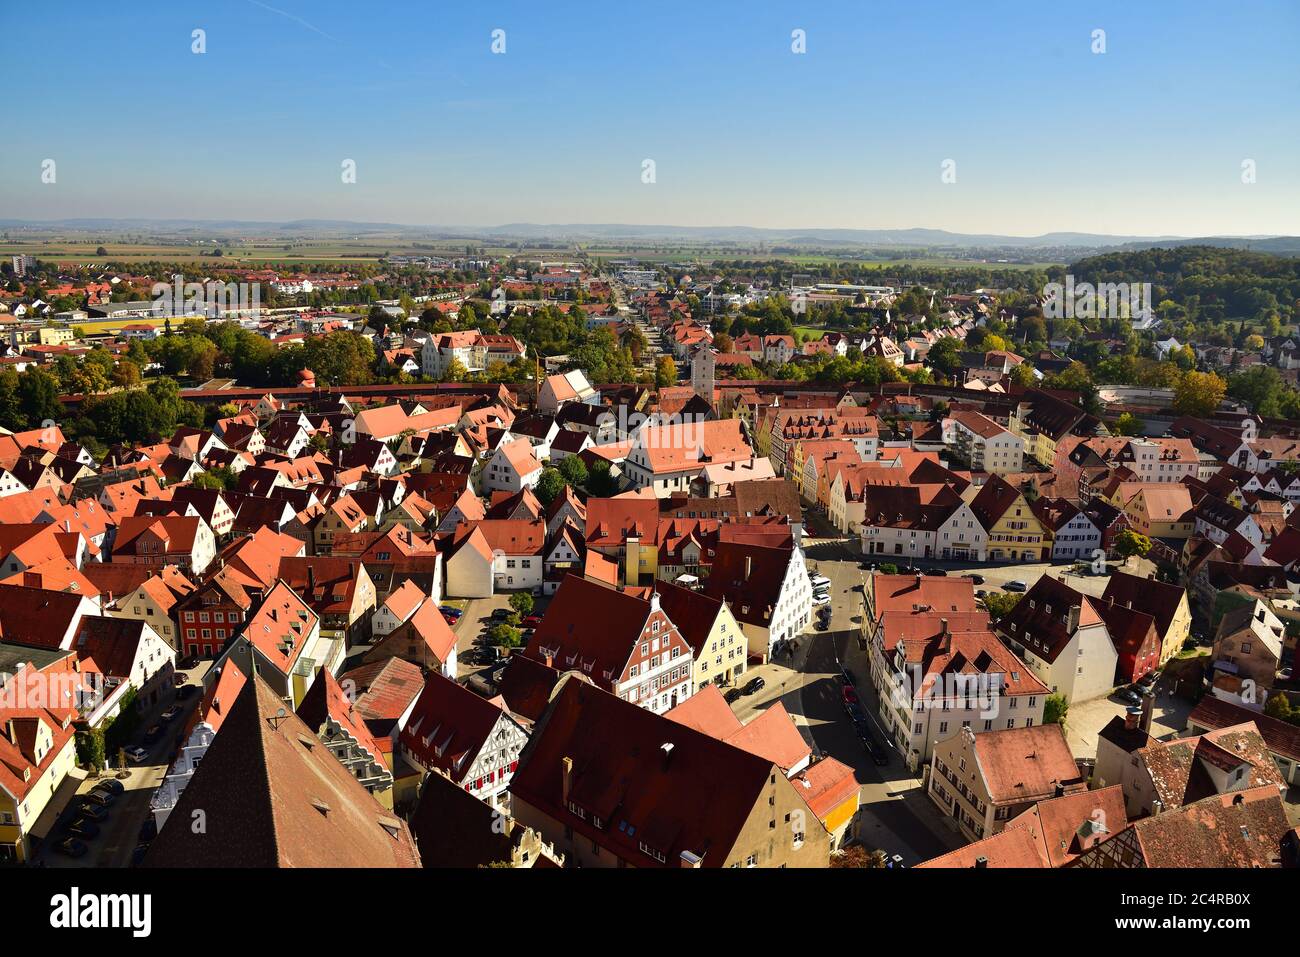 Looking down from The Tower of St. Georges Church at The Middle Ages History City of Nördlingen, Bavaria, Germany, Europe. Stock Photo